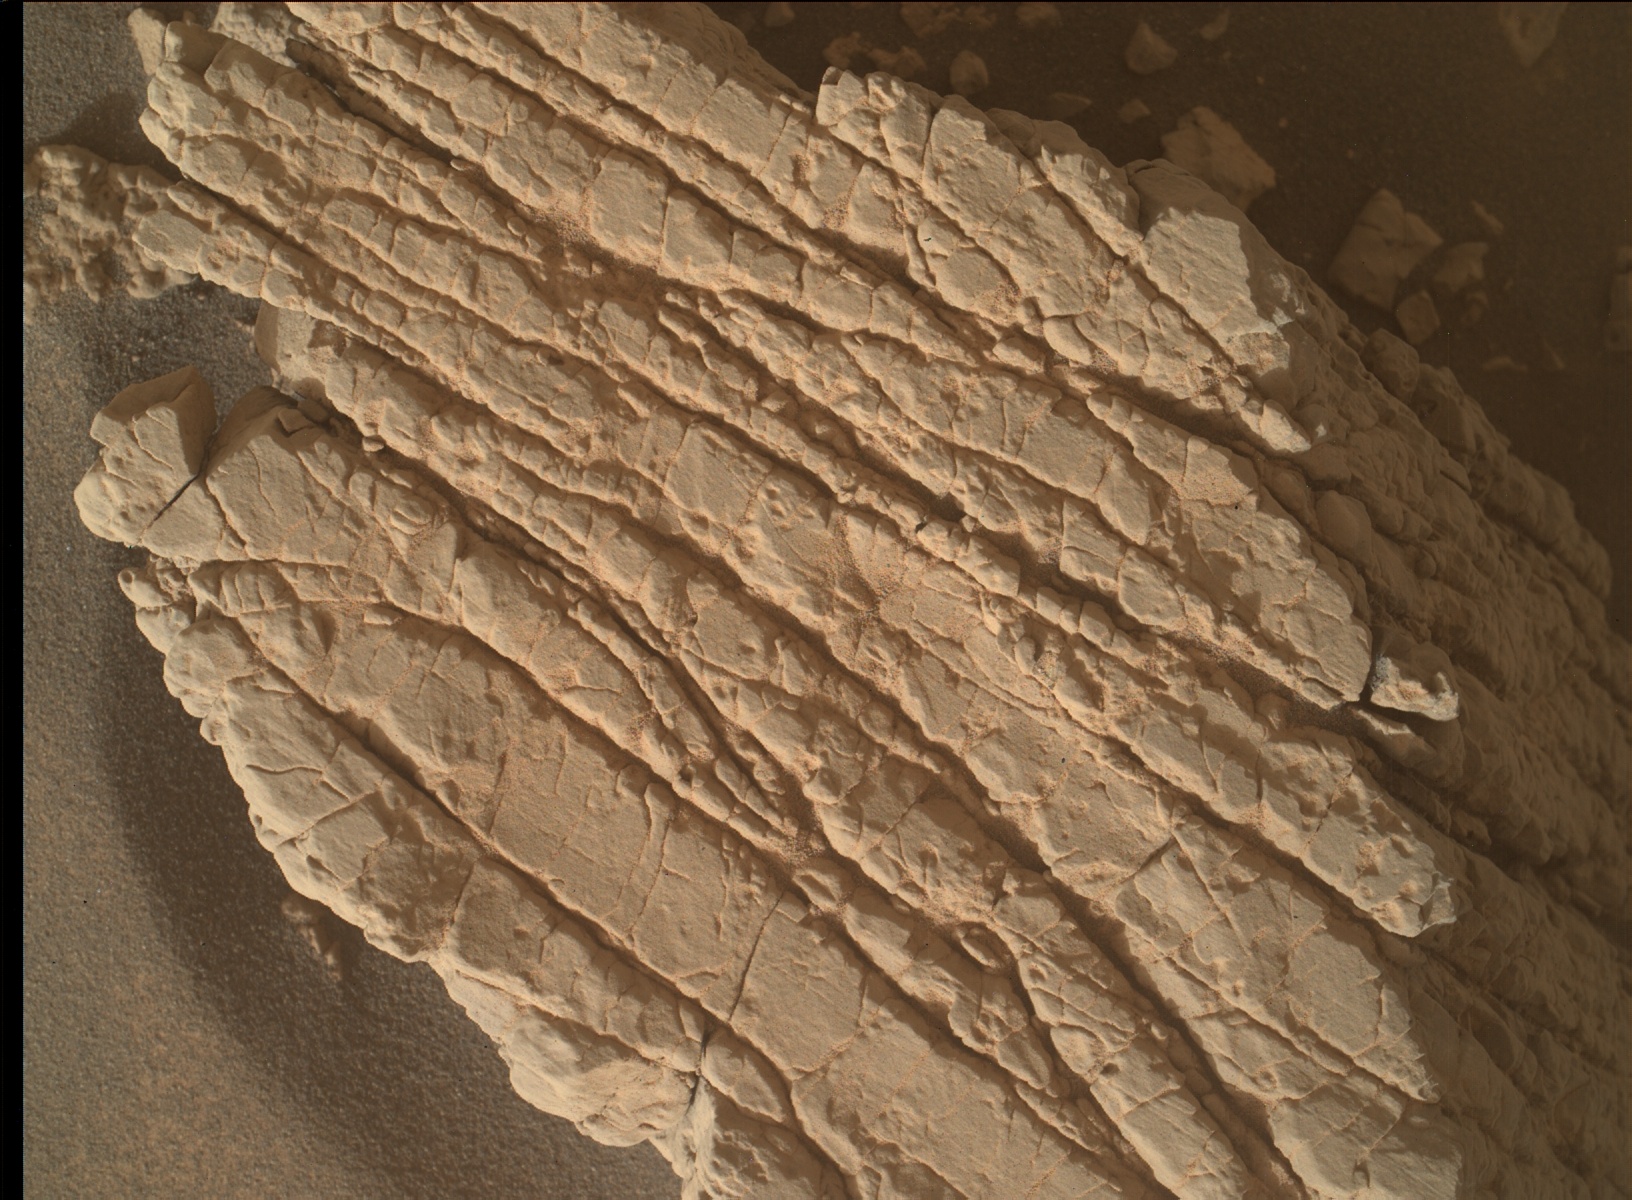 Nasa's Mars rover Curiosity acquired this image using its Mars Hand Lens Imager (MAHLI) on Sol 3534